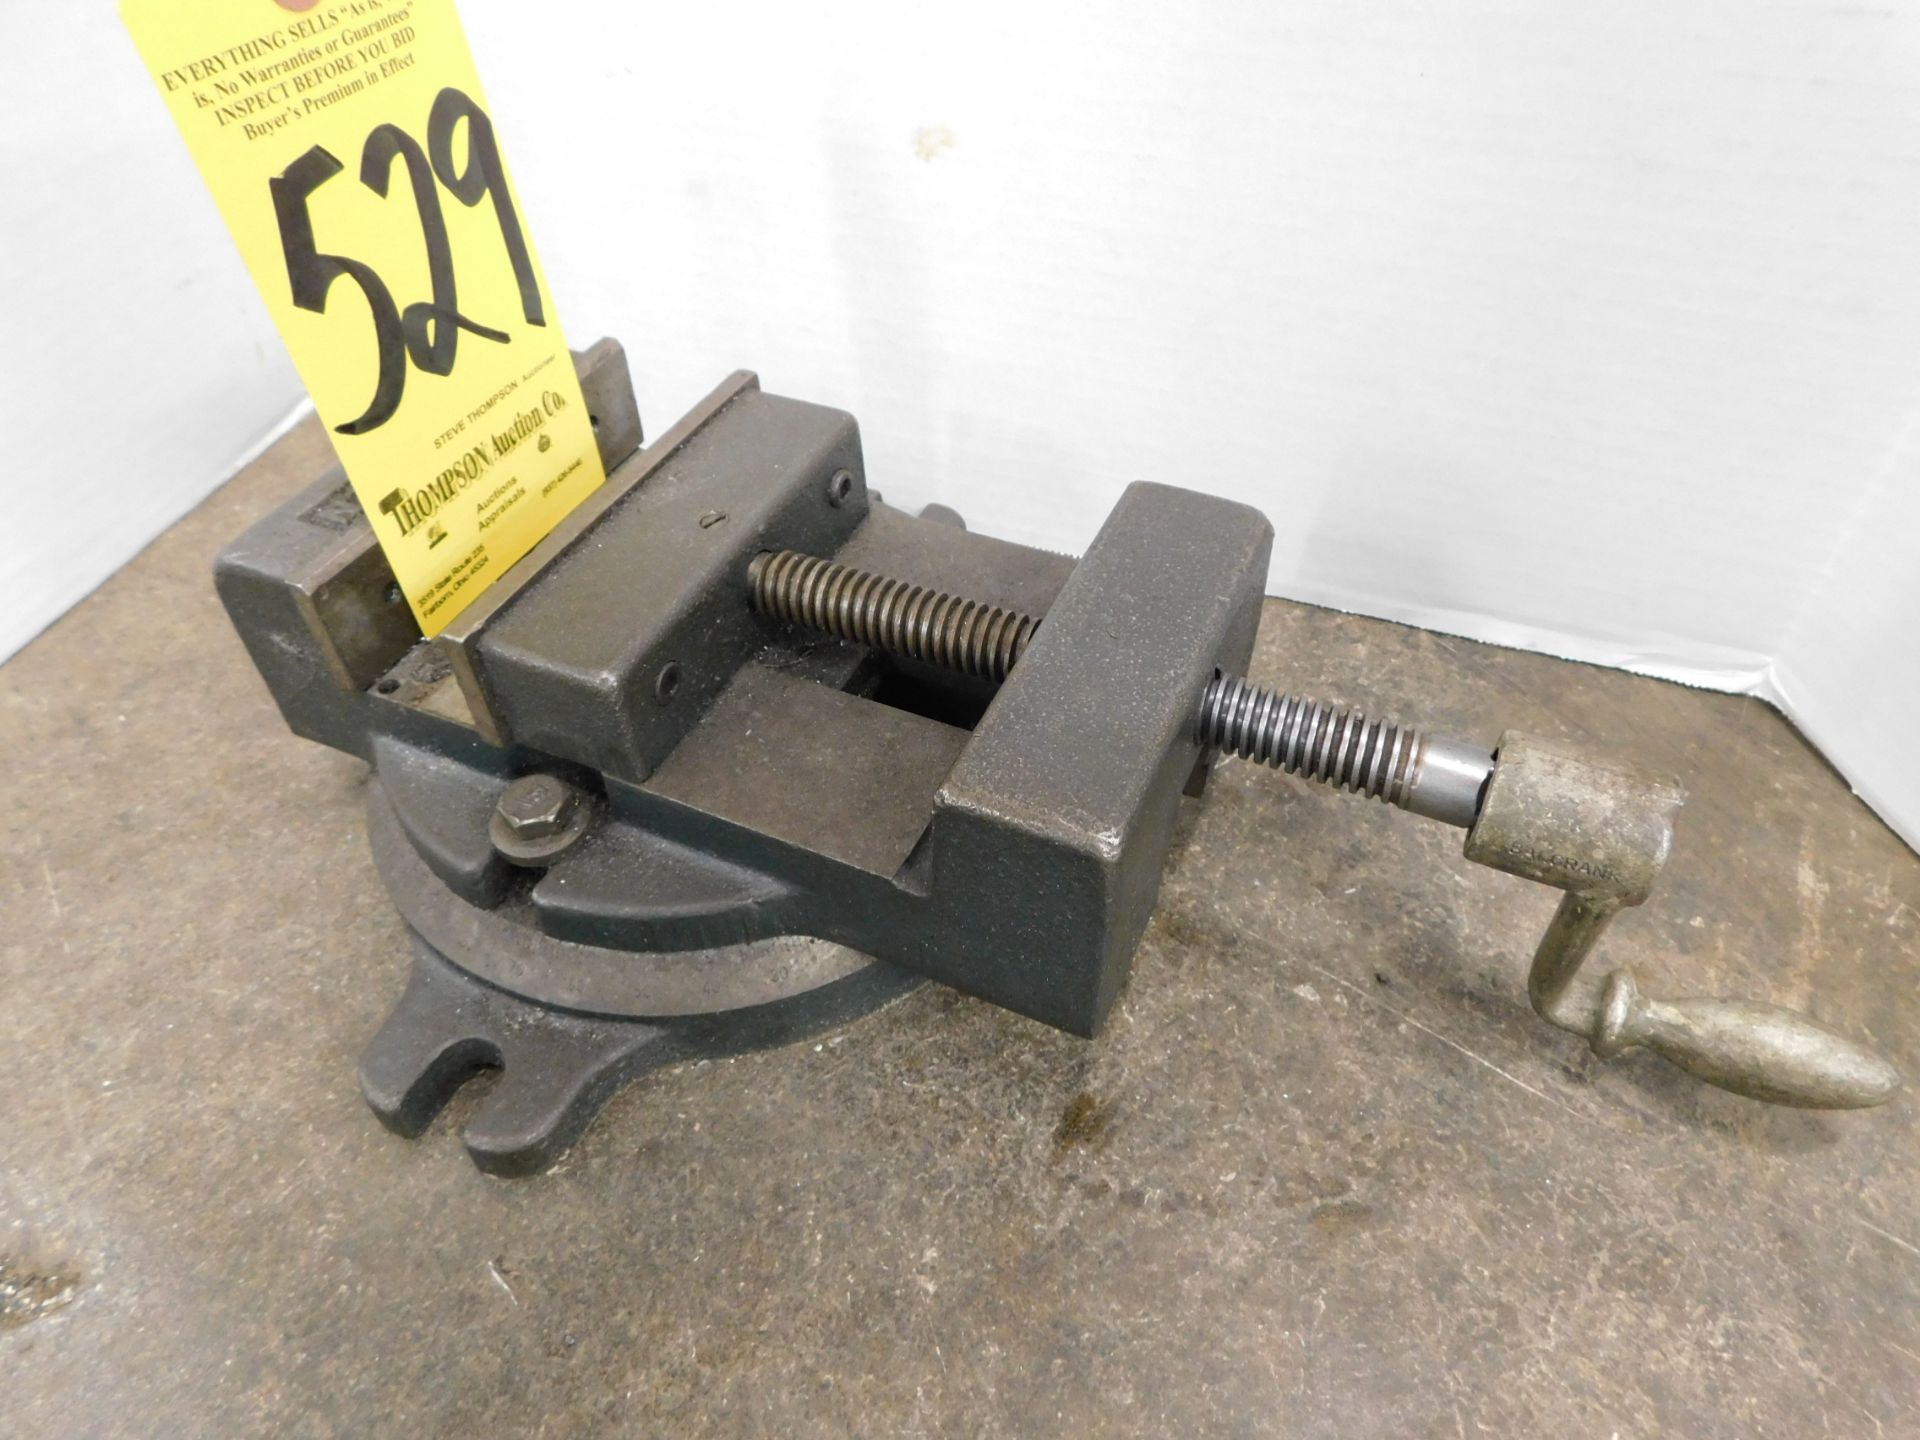 4 1/2" Mill Vise